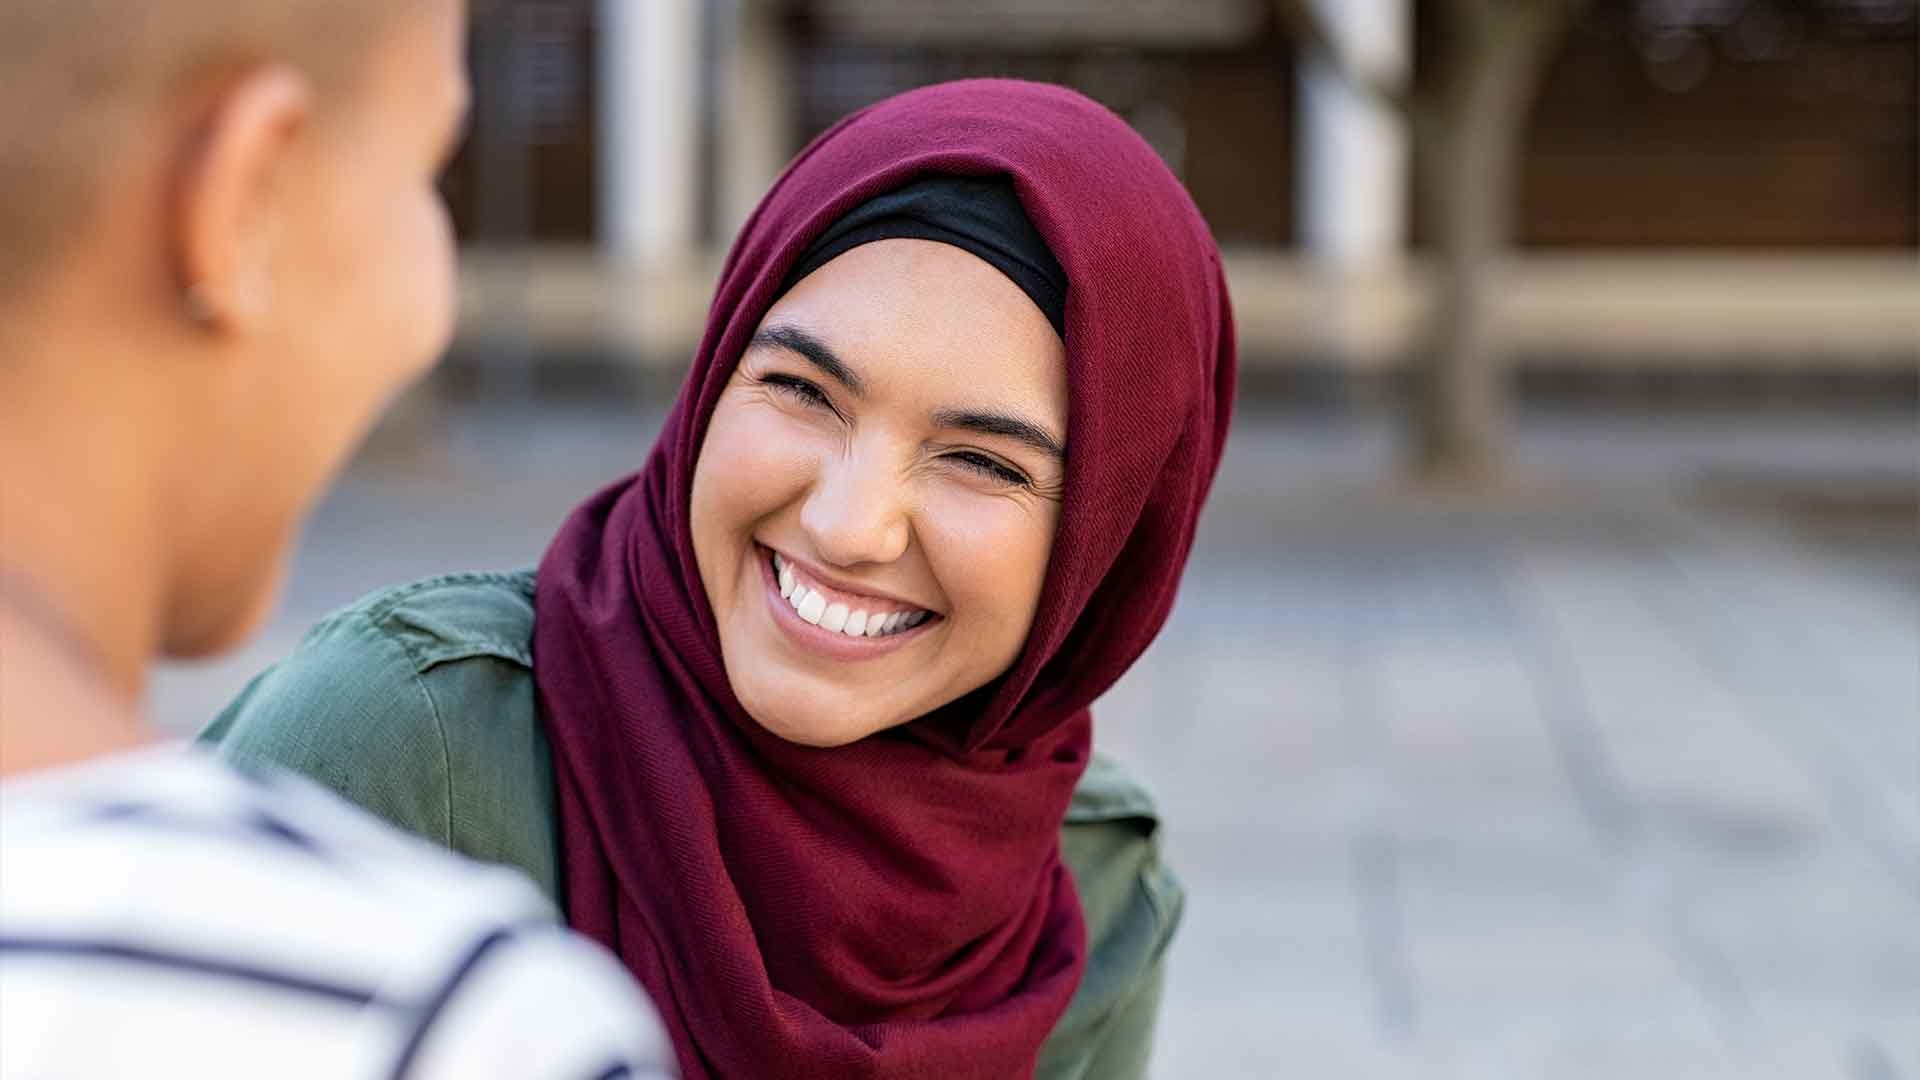 A person wearing a hijab and smiling at their friend